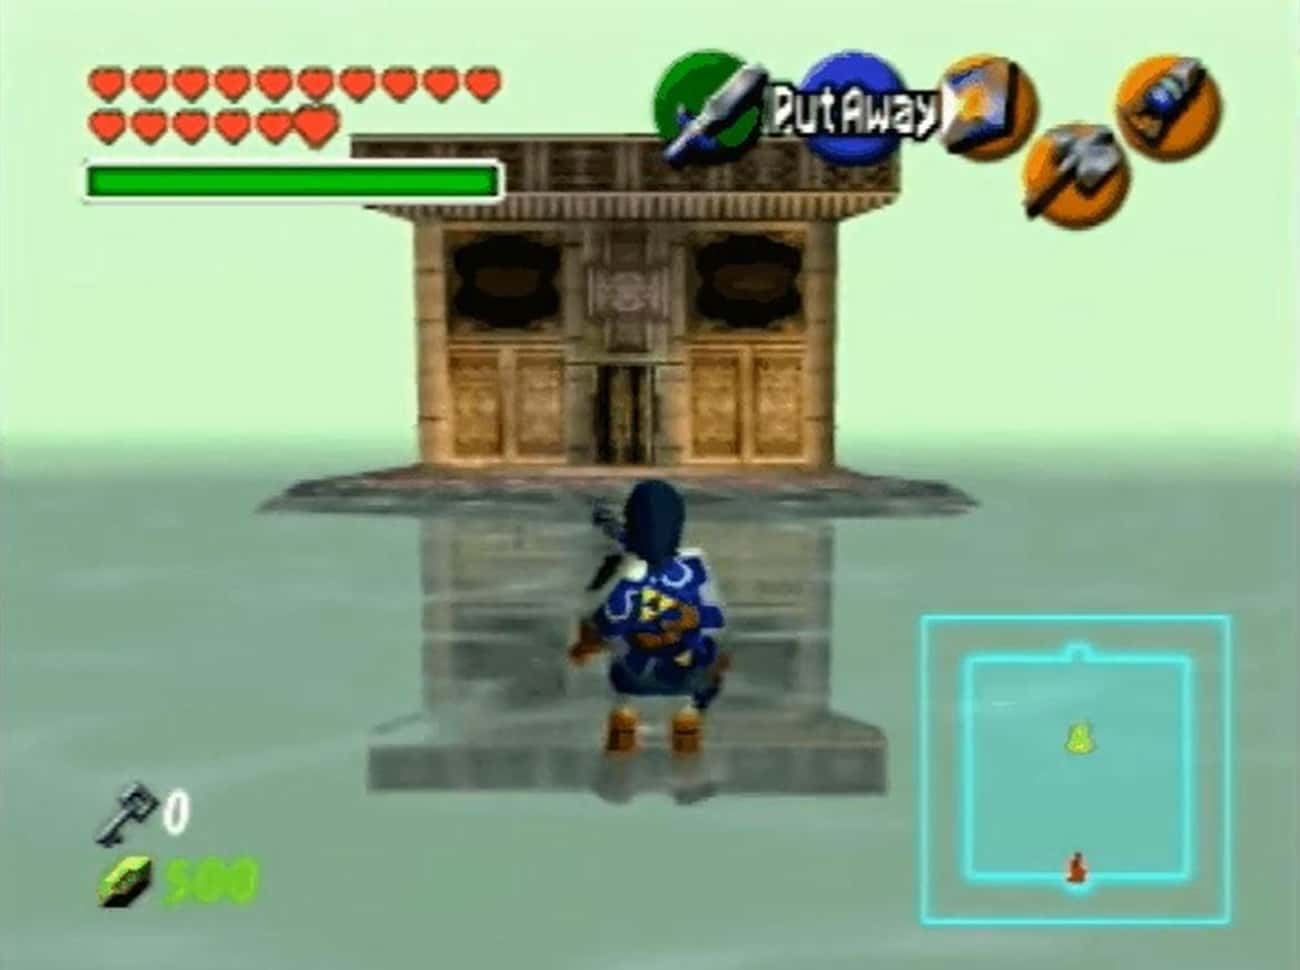 Link's Reflection Disappears After Dark Link Appears In 'Ocarina Of Time'